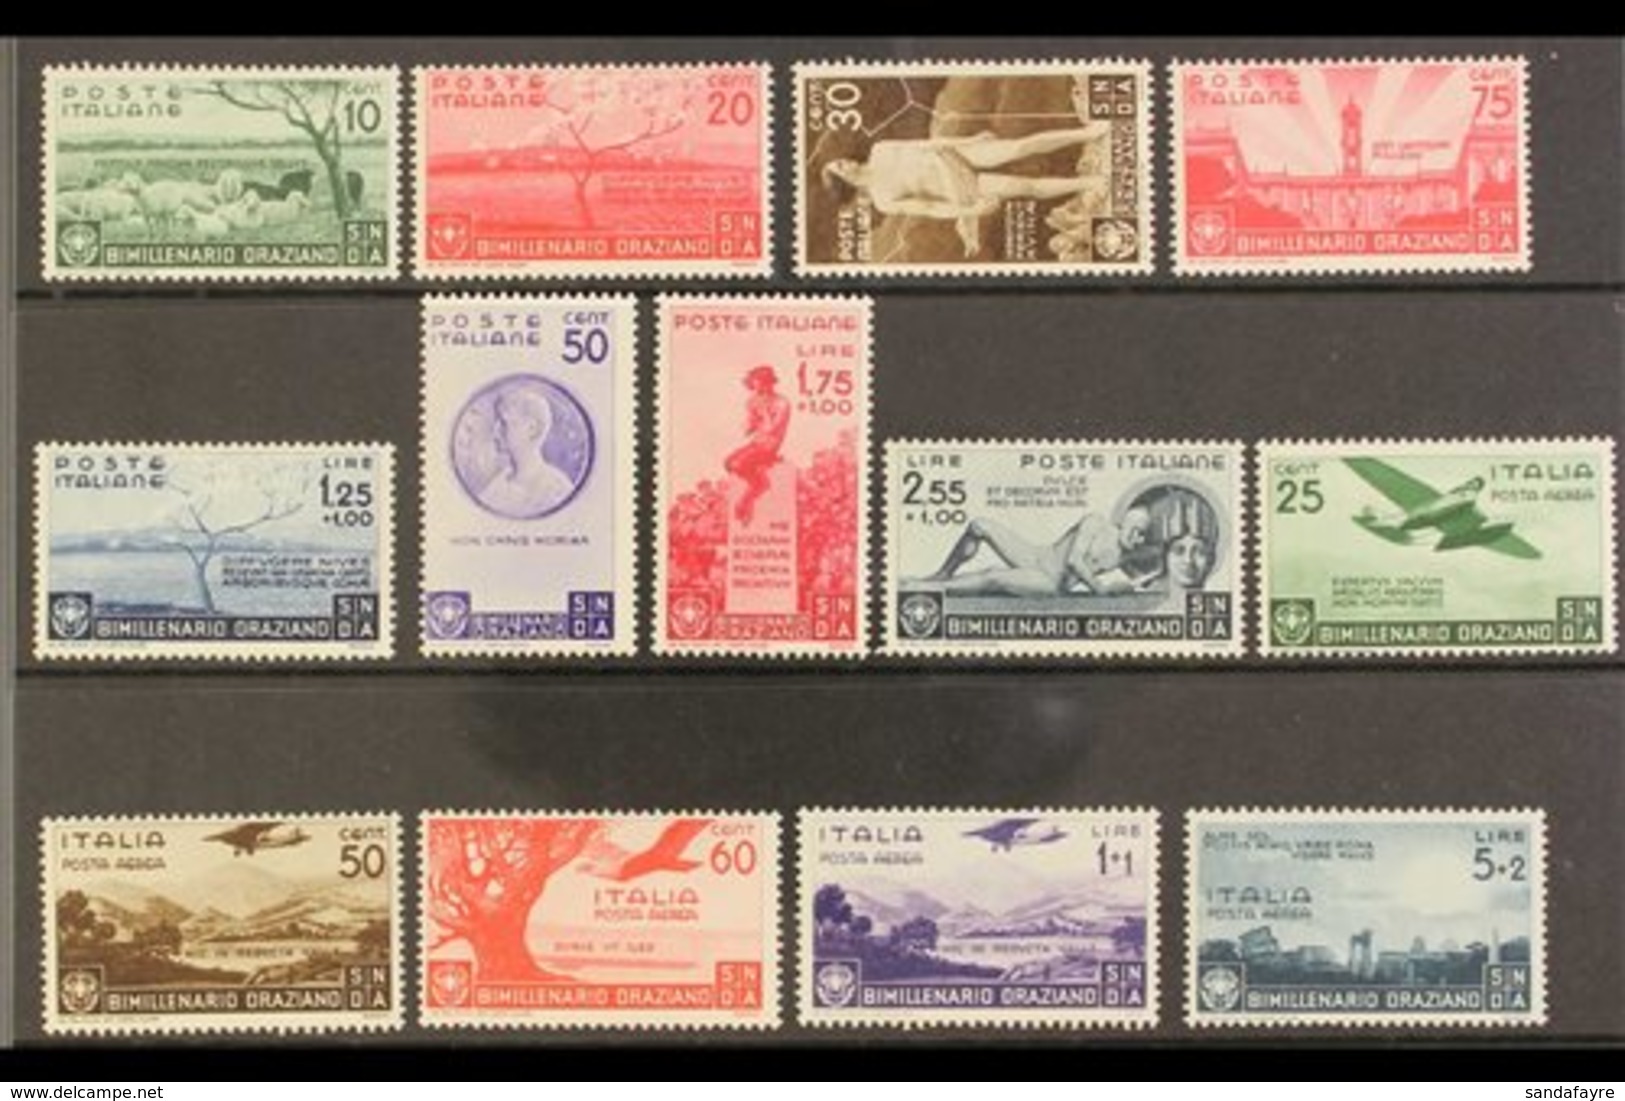 1946 Horace Complete Set Incl Airs (Sassone 398/405 & A95/99, SG 477/89), Never Hinged Mint, Fresh. (13 Stamps) For More - Unclassified